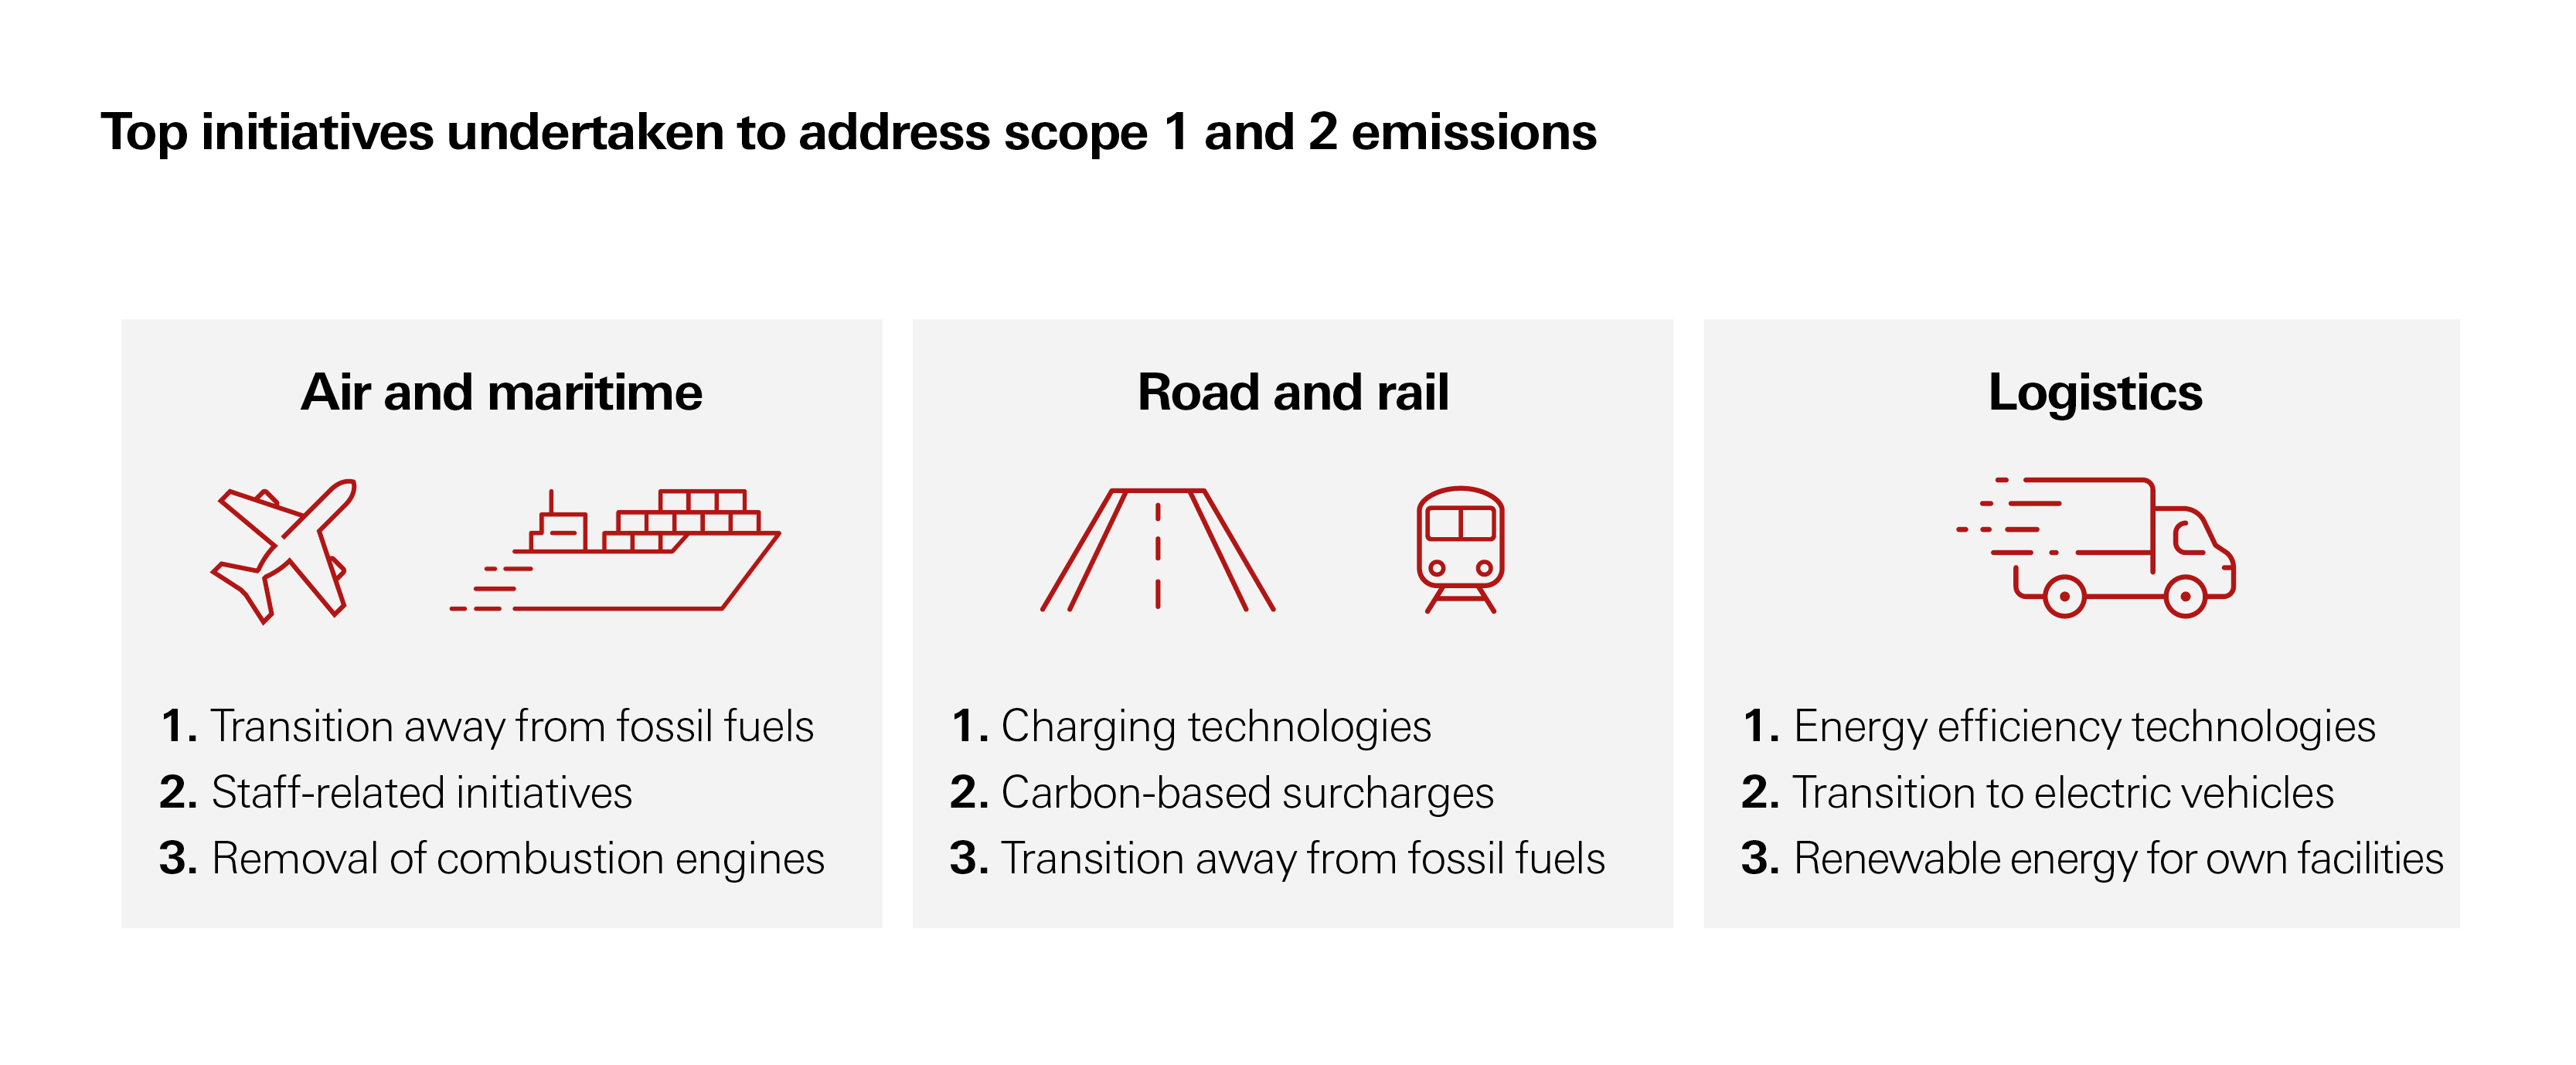 Top initiatives undertaken to address scope 1 and 2 emissions for air and maritime, road and rail, and logistics companies.